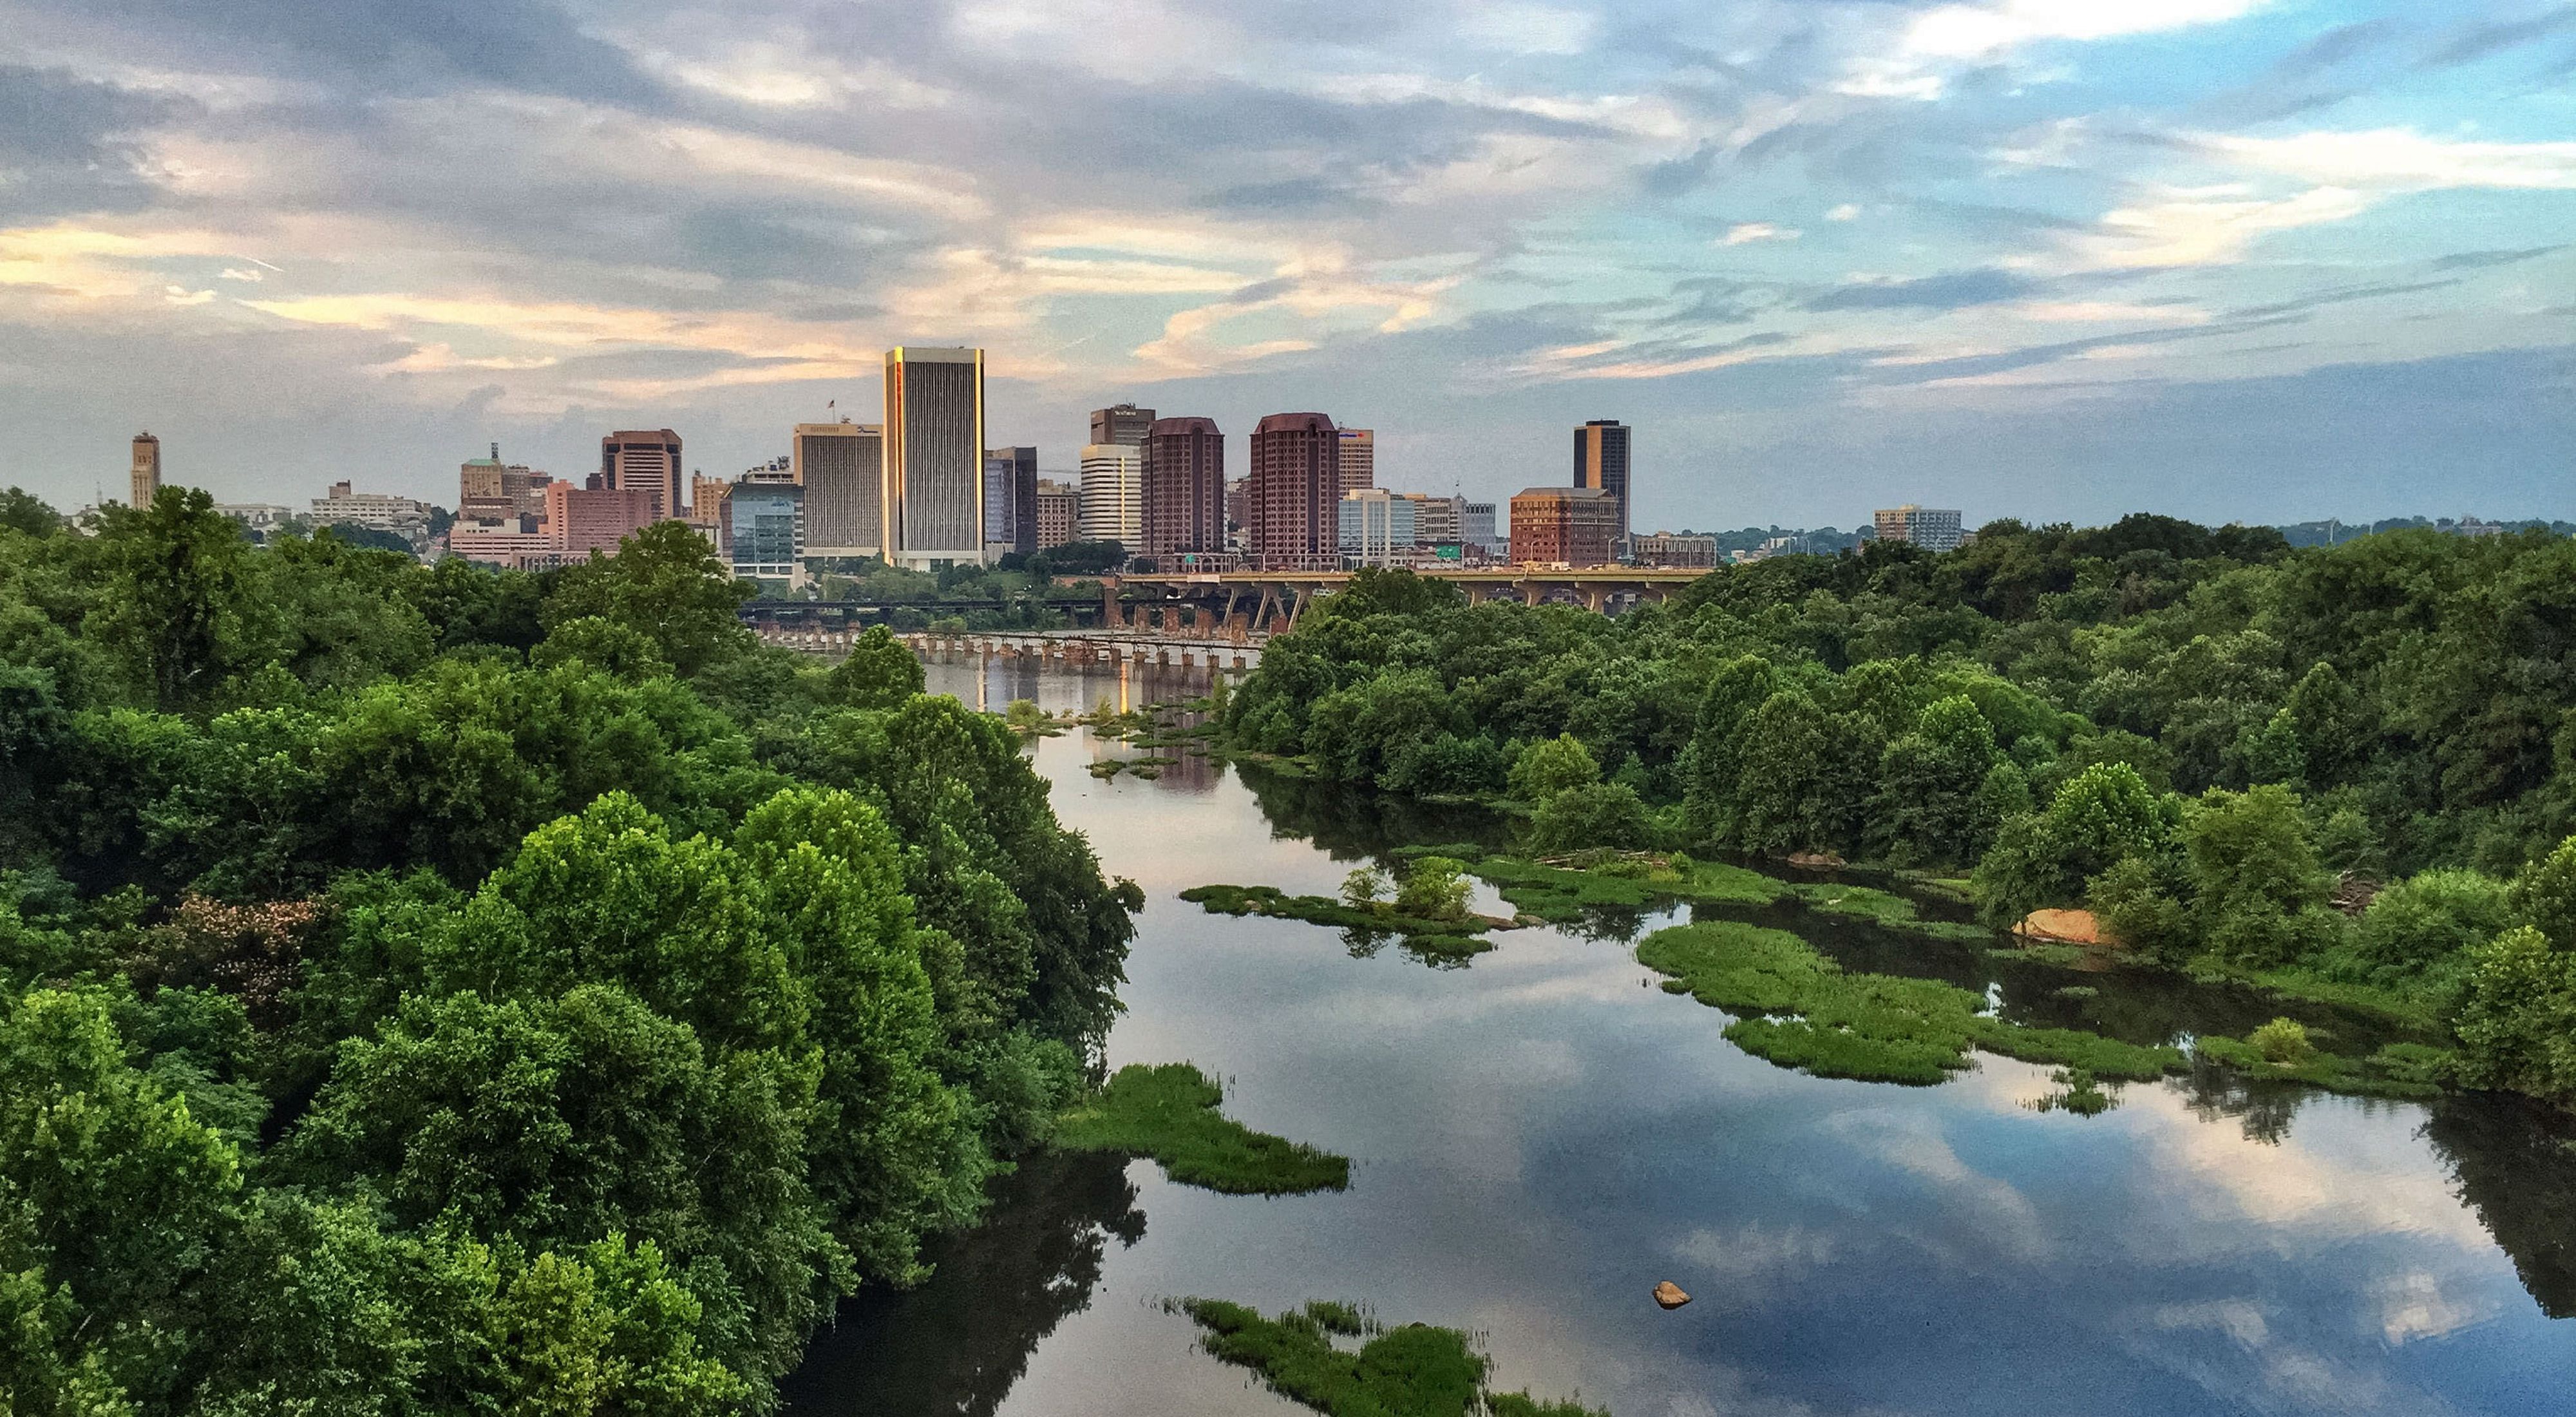 Aerial view of the James River looking downstream to downtown Richmond. A wide river flows between forested banks. An urban downtown of high-rise buildings is in the background.